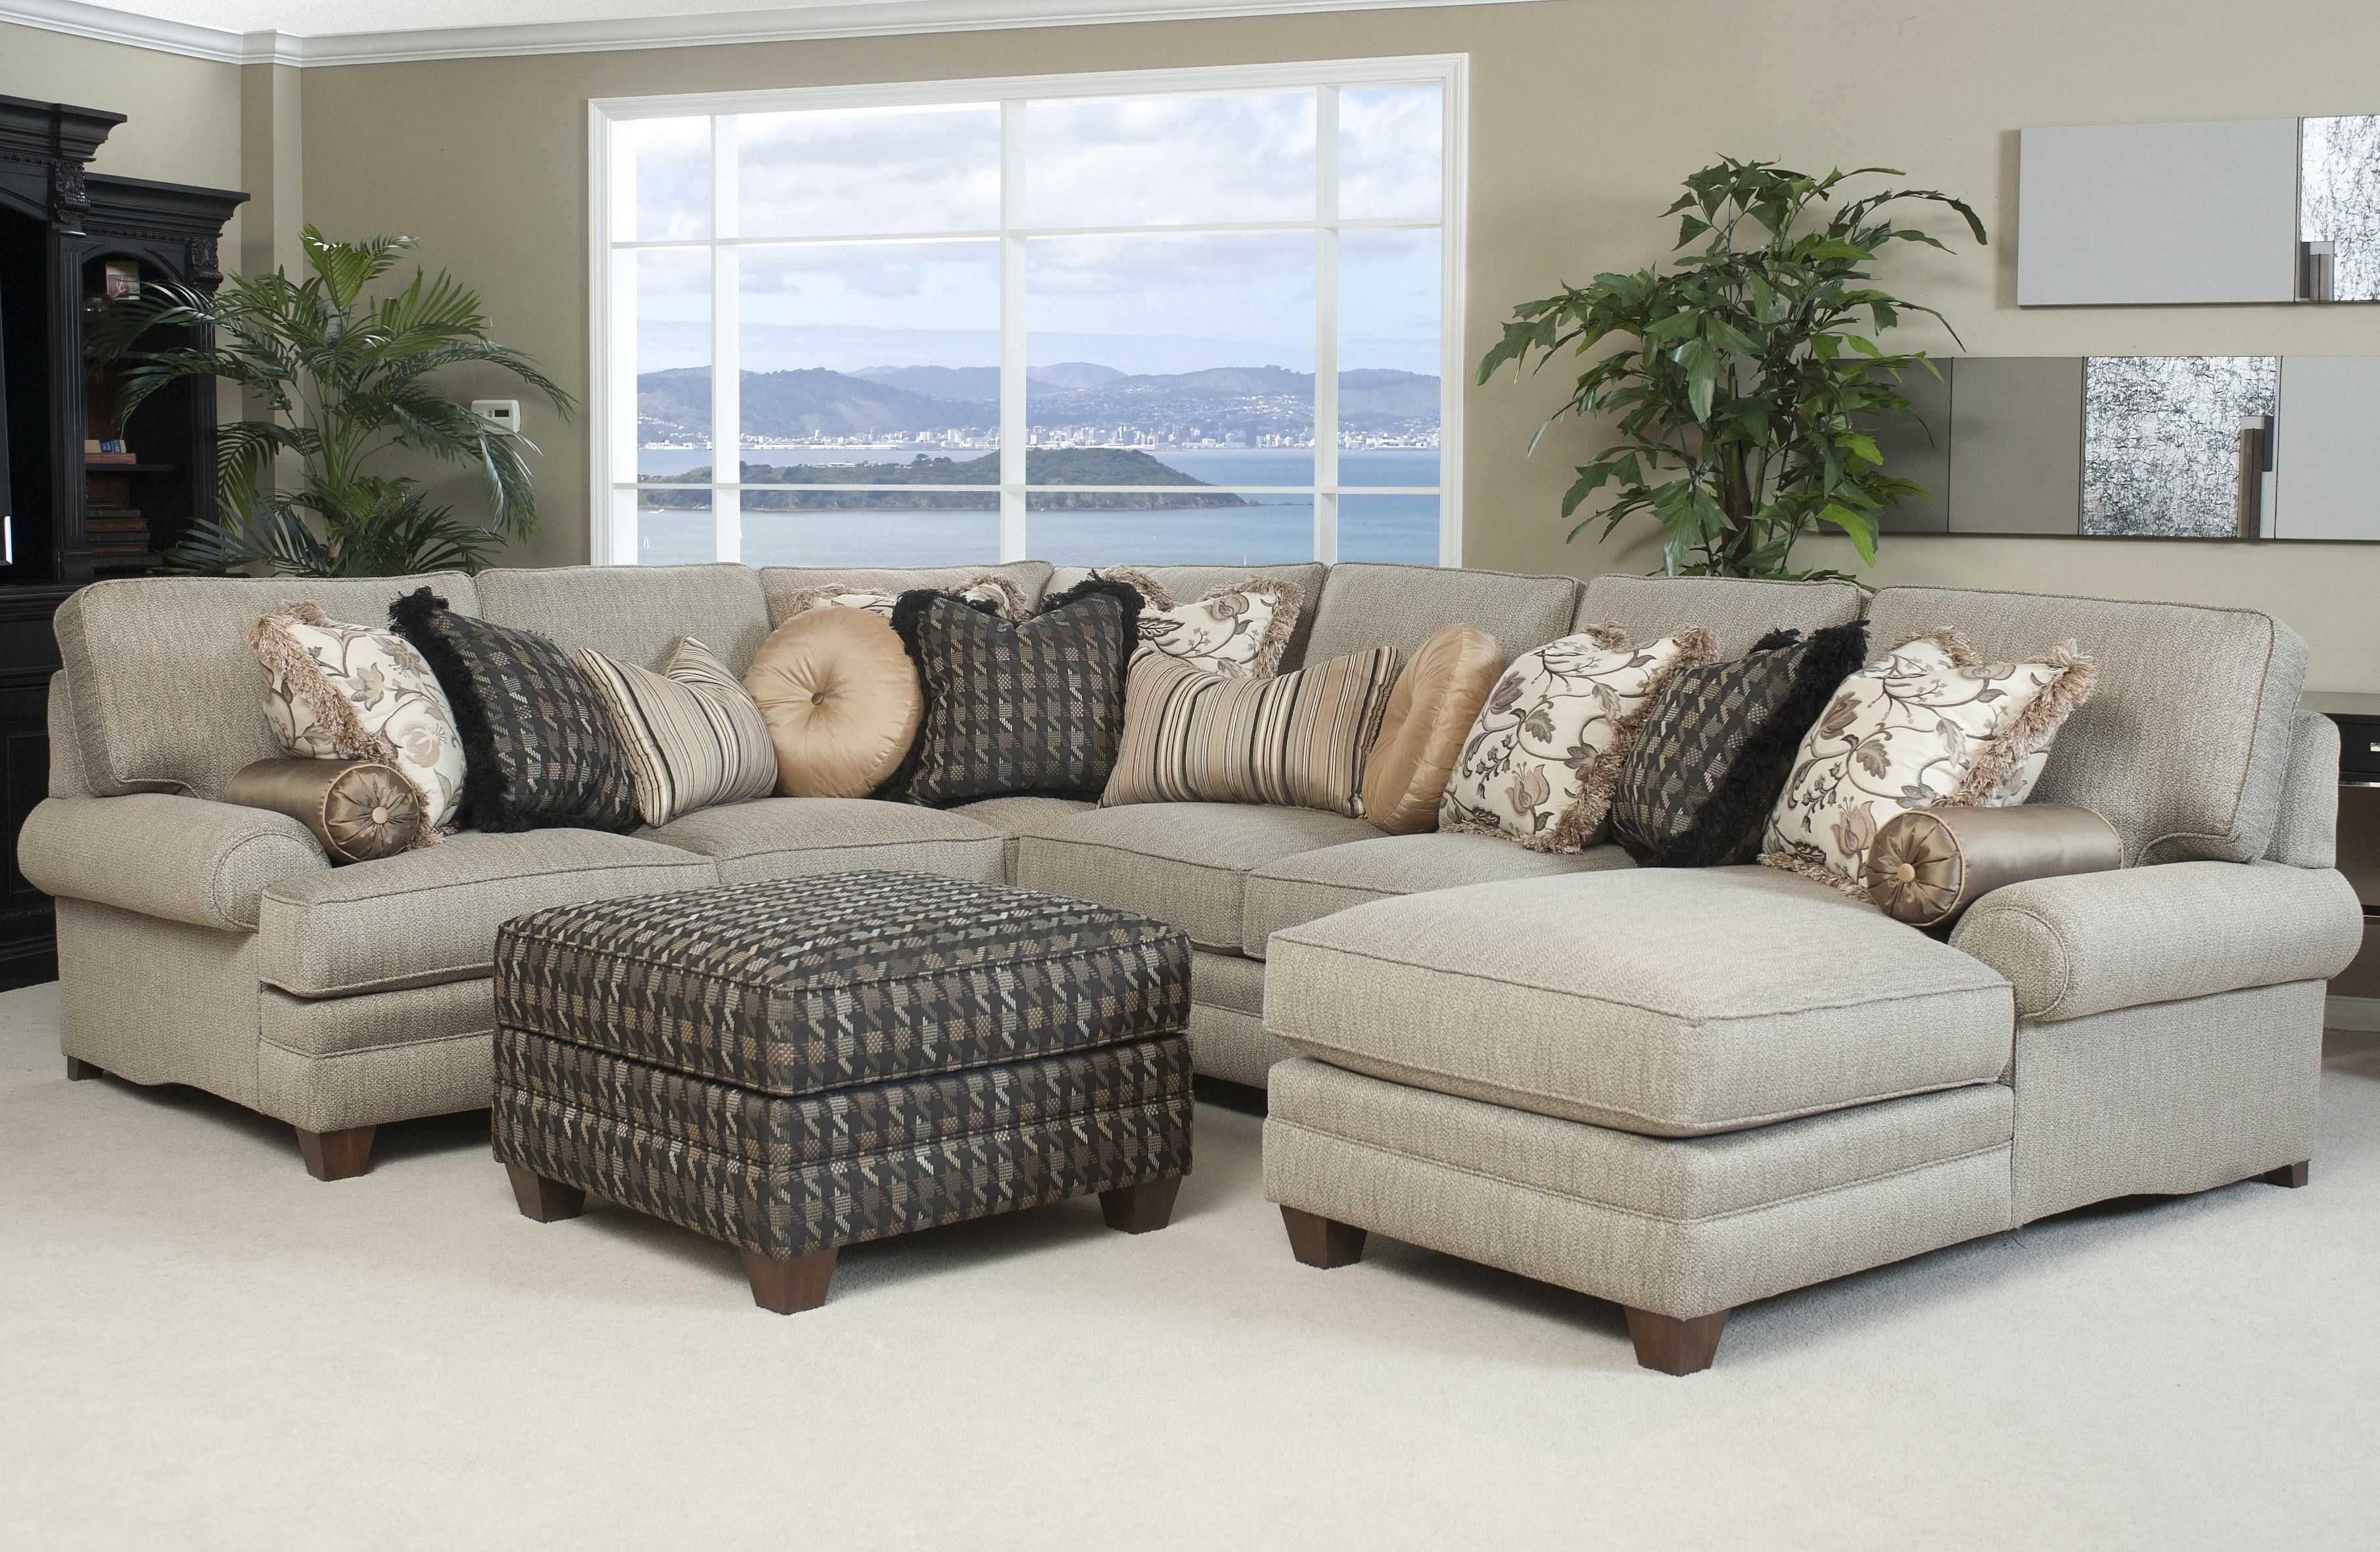 Perfect Sectional Sofas Tulsa 91 For Your Eco Friendly Sectional Throughout Eco Friendly Sectional Sofas (View 7 of 10)